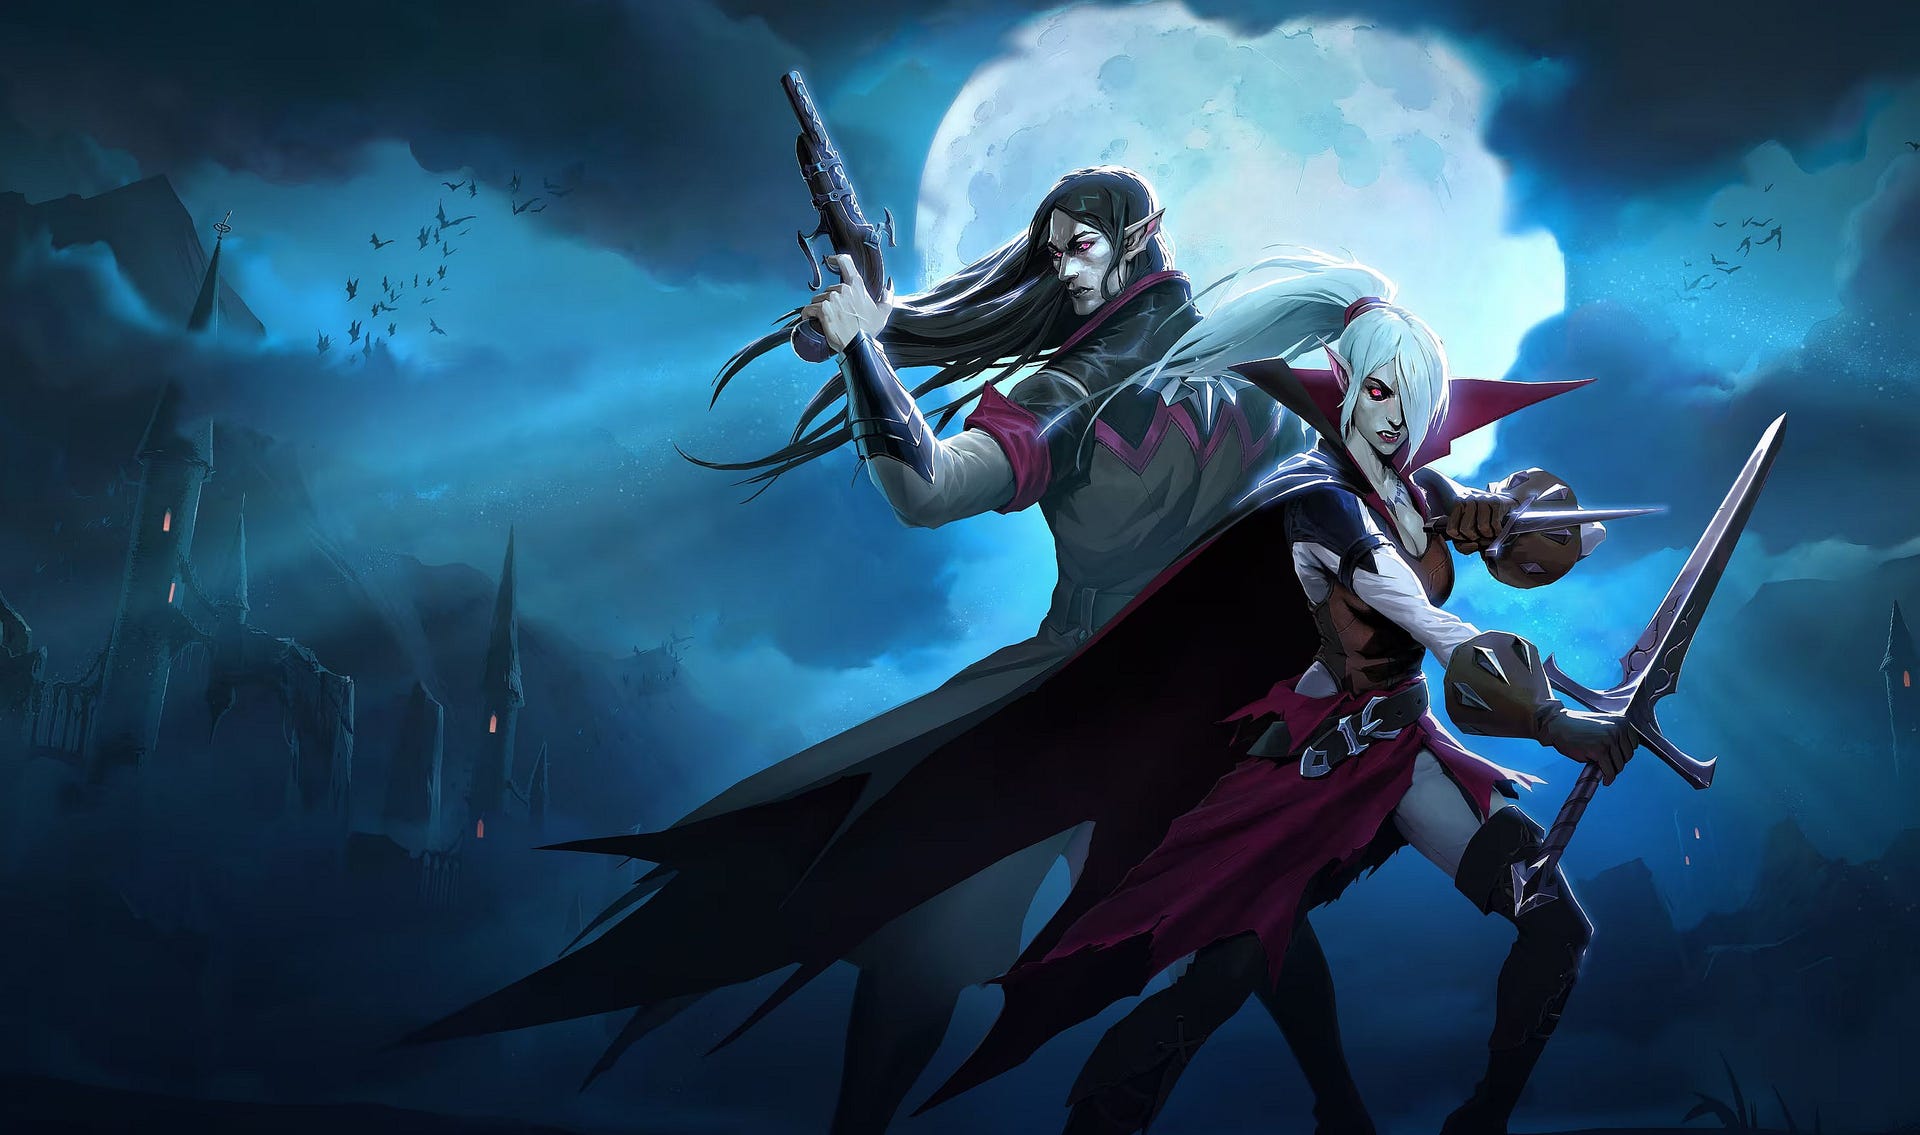 V Rising - Legacy of Castlevania pits you against legendary vampire hunter Simon Belmont in a neat crossover this spring